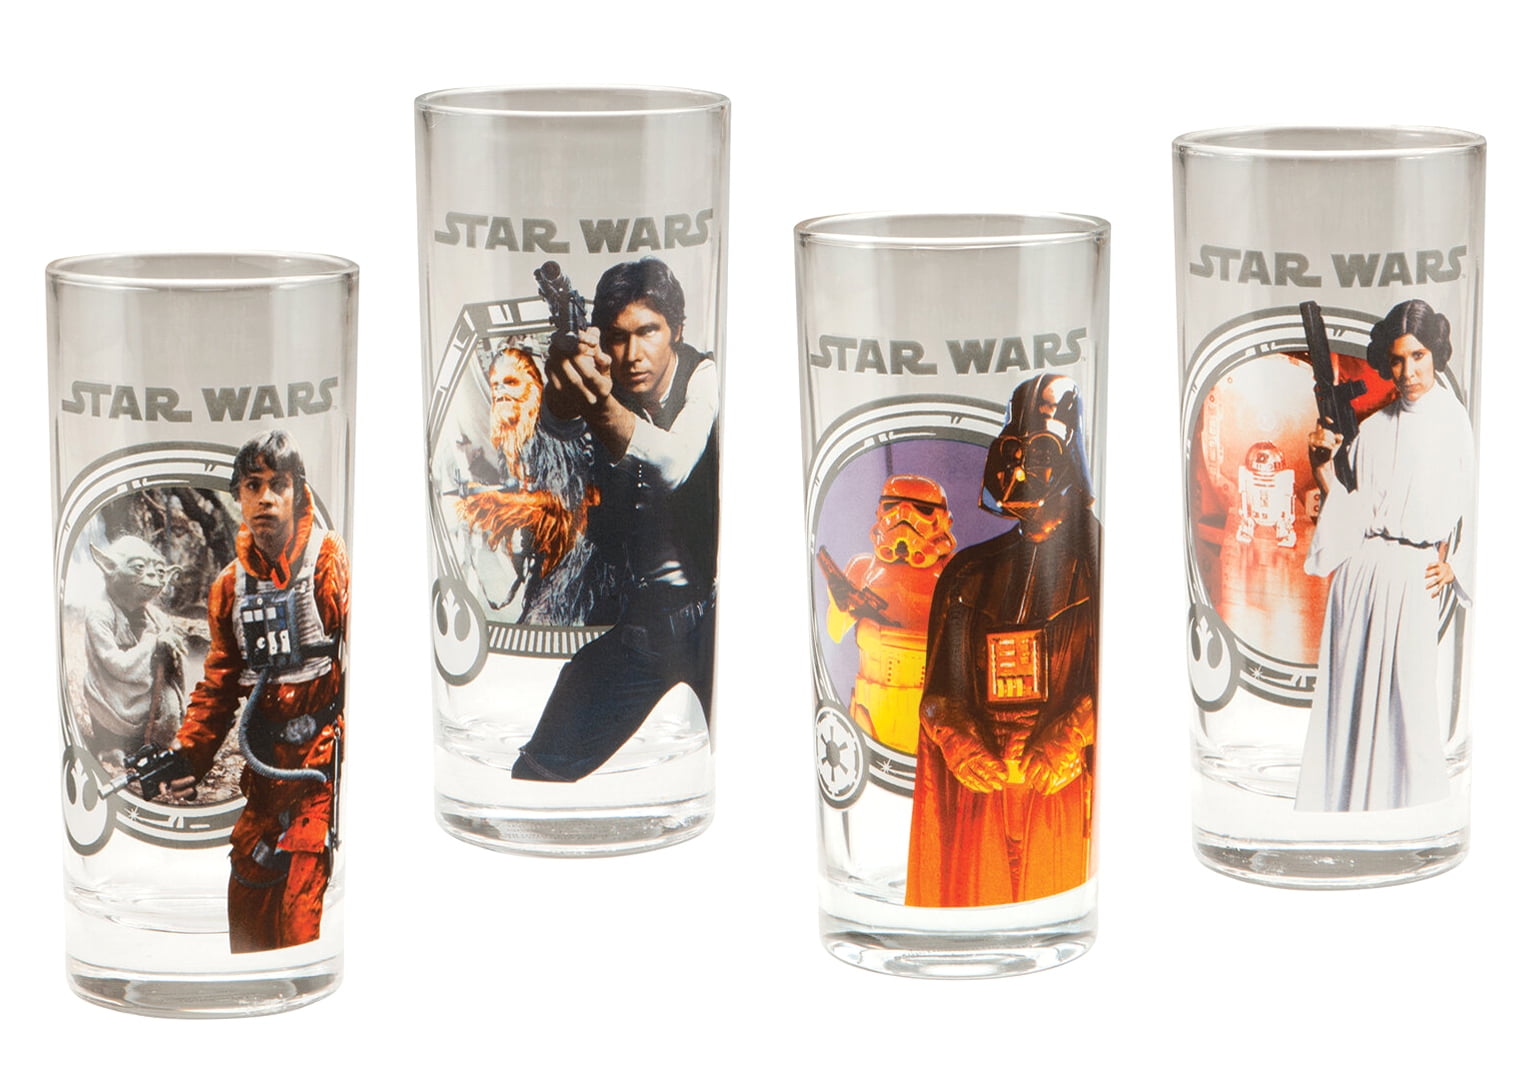 NEW Set of 4 Disney STAR WARS Collectible 16 oz Drinking Glasses Pint Glass 